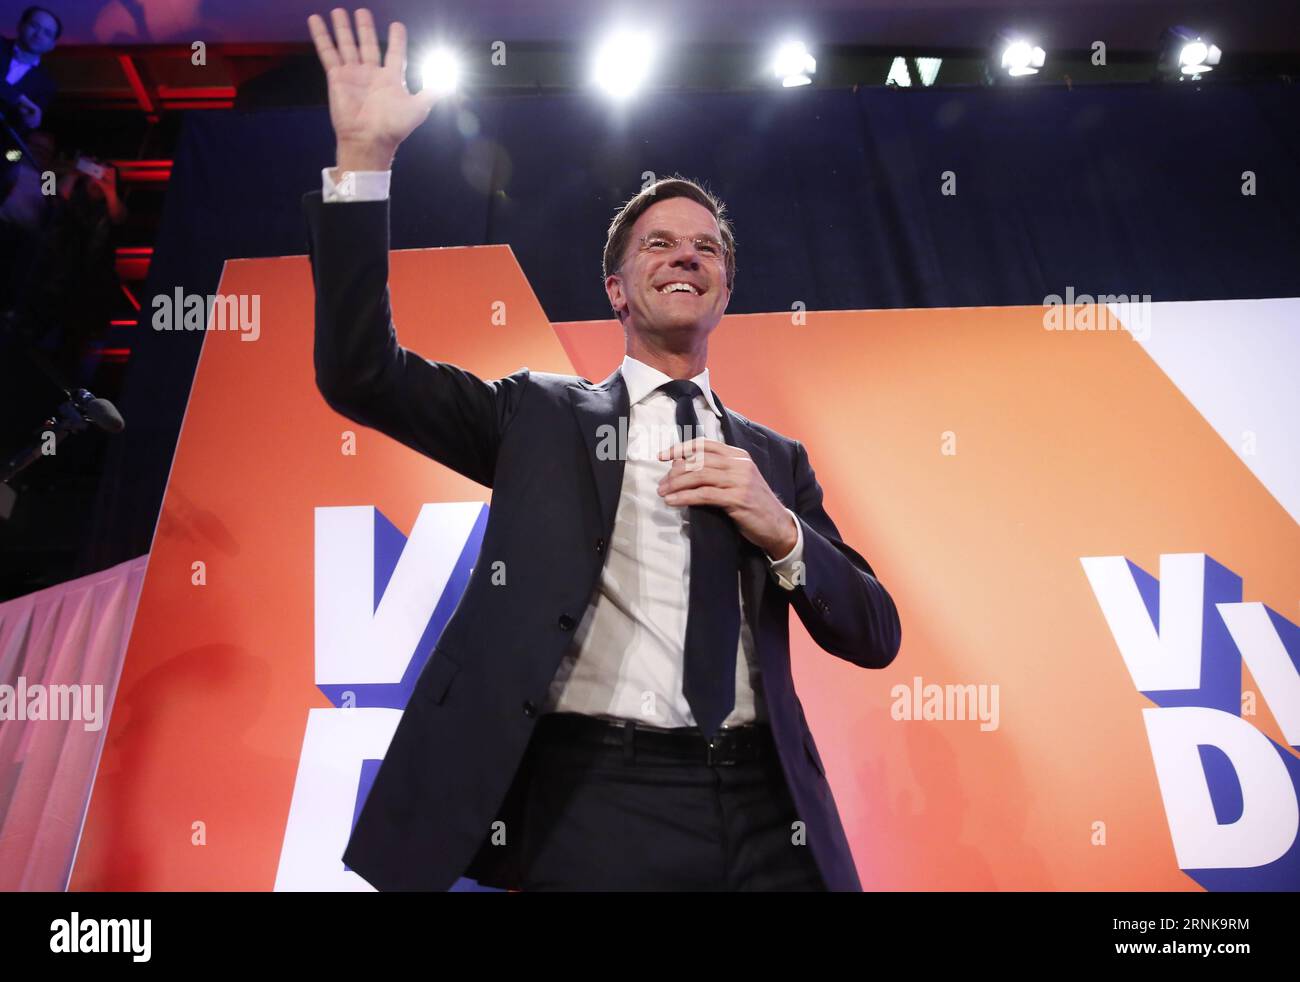 (170315) -- THE HAGUE, March 15, 2017 -- Dutch Prime Minister and People s Party for Freedom and Democracy VVD leader Mark Rutte gestures during election night for his liberal rightist party VVD in The Hague, the Netherlands, on March 15, 2017. The liberal rightist party VVD of Prime Minister Mark Rutte took the lead in the Dutch parliamentary elections, according to the final exit poll released on Wednesday, with the far-right party PVV staying far behind. ) THE NETHERLANDS-THE HAGUE-PARLIAMENTARY ELECTIONS-EXIT POLL-VVD-LEADING-MARK RUTTE YexPingfan PUBLICATIONxNOTxINxCHN   The Hague March 1 Stock Photo